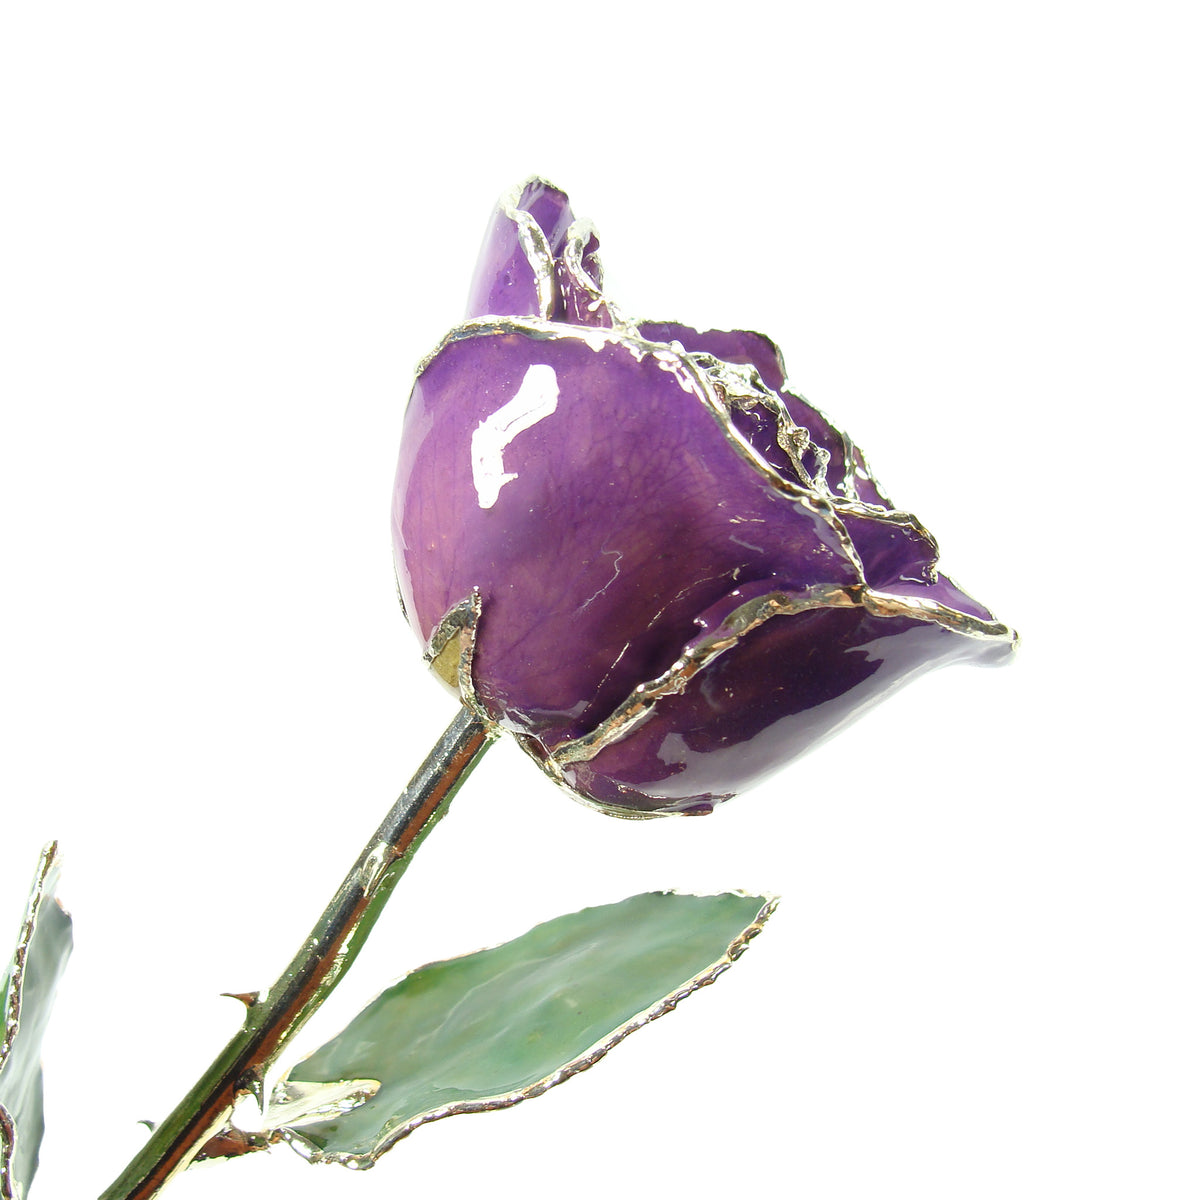 Silver Trimmed Forever Rose with Purple  Petals. View of Stem, Leaves, and Rose Petals and Showing Detail of Silver Trim